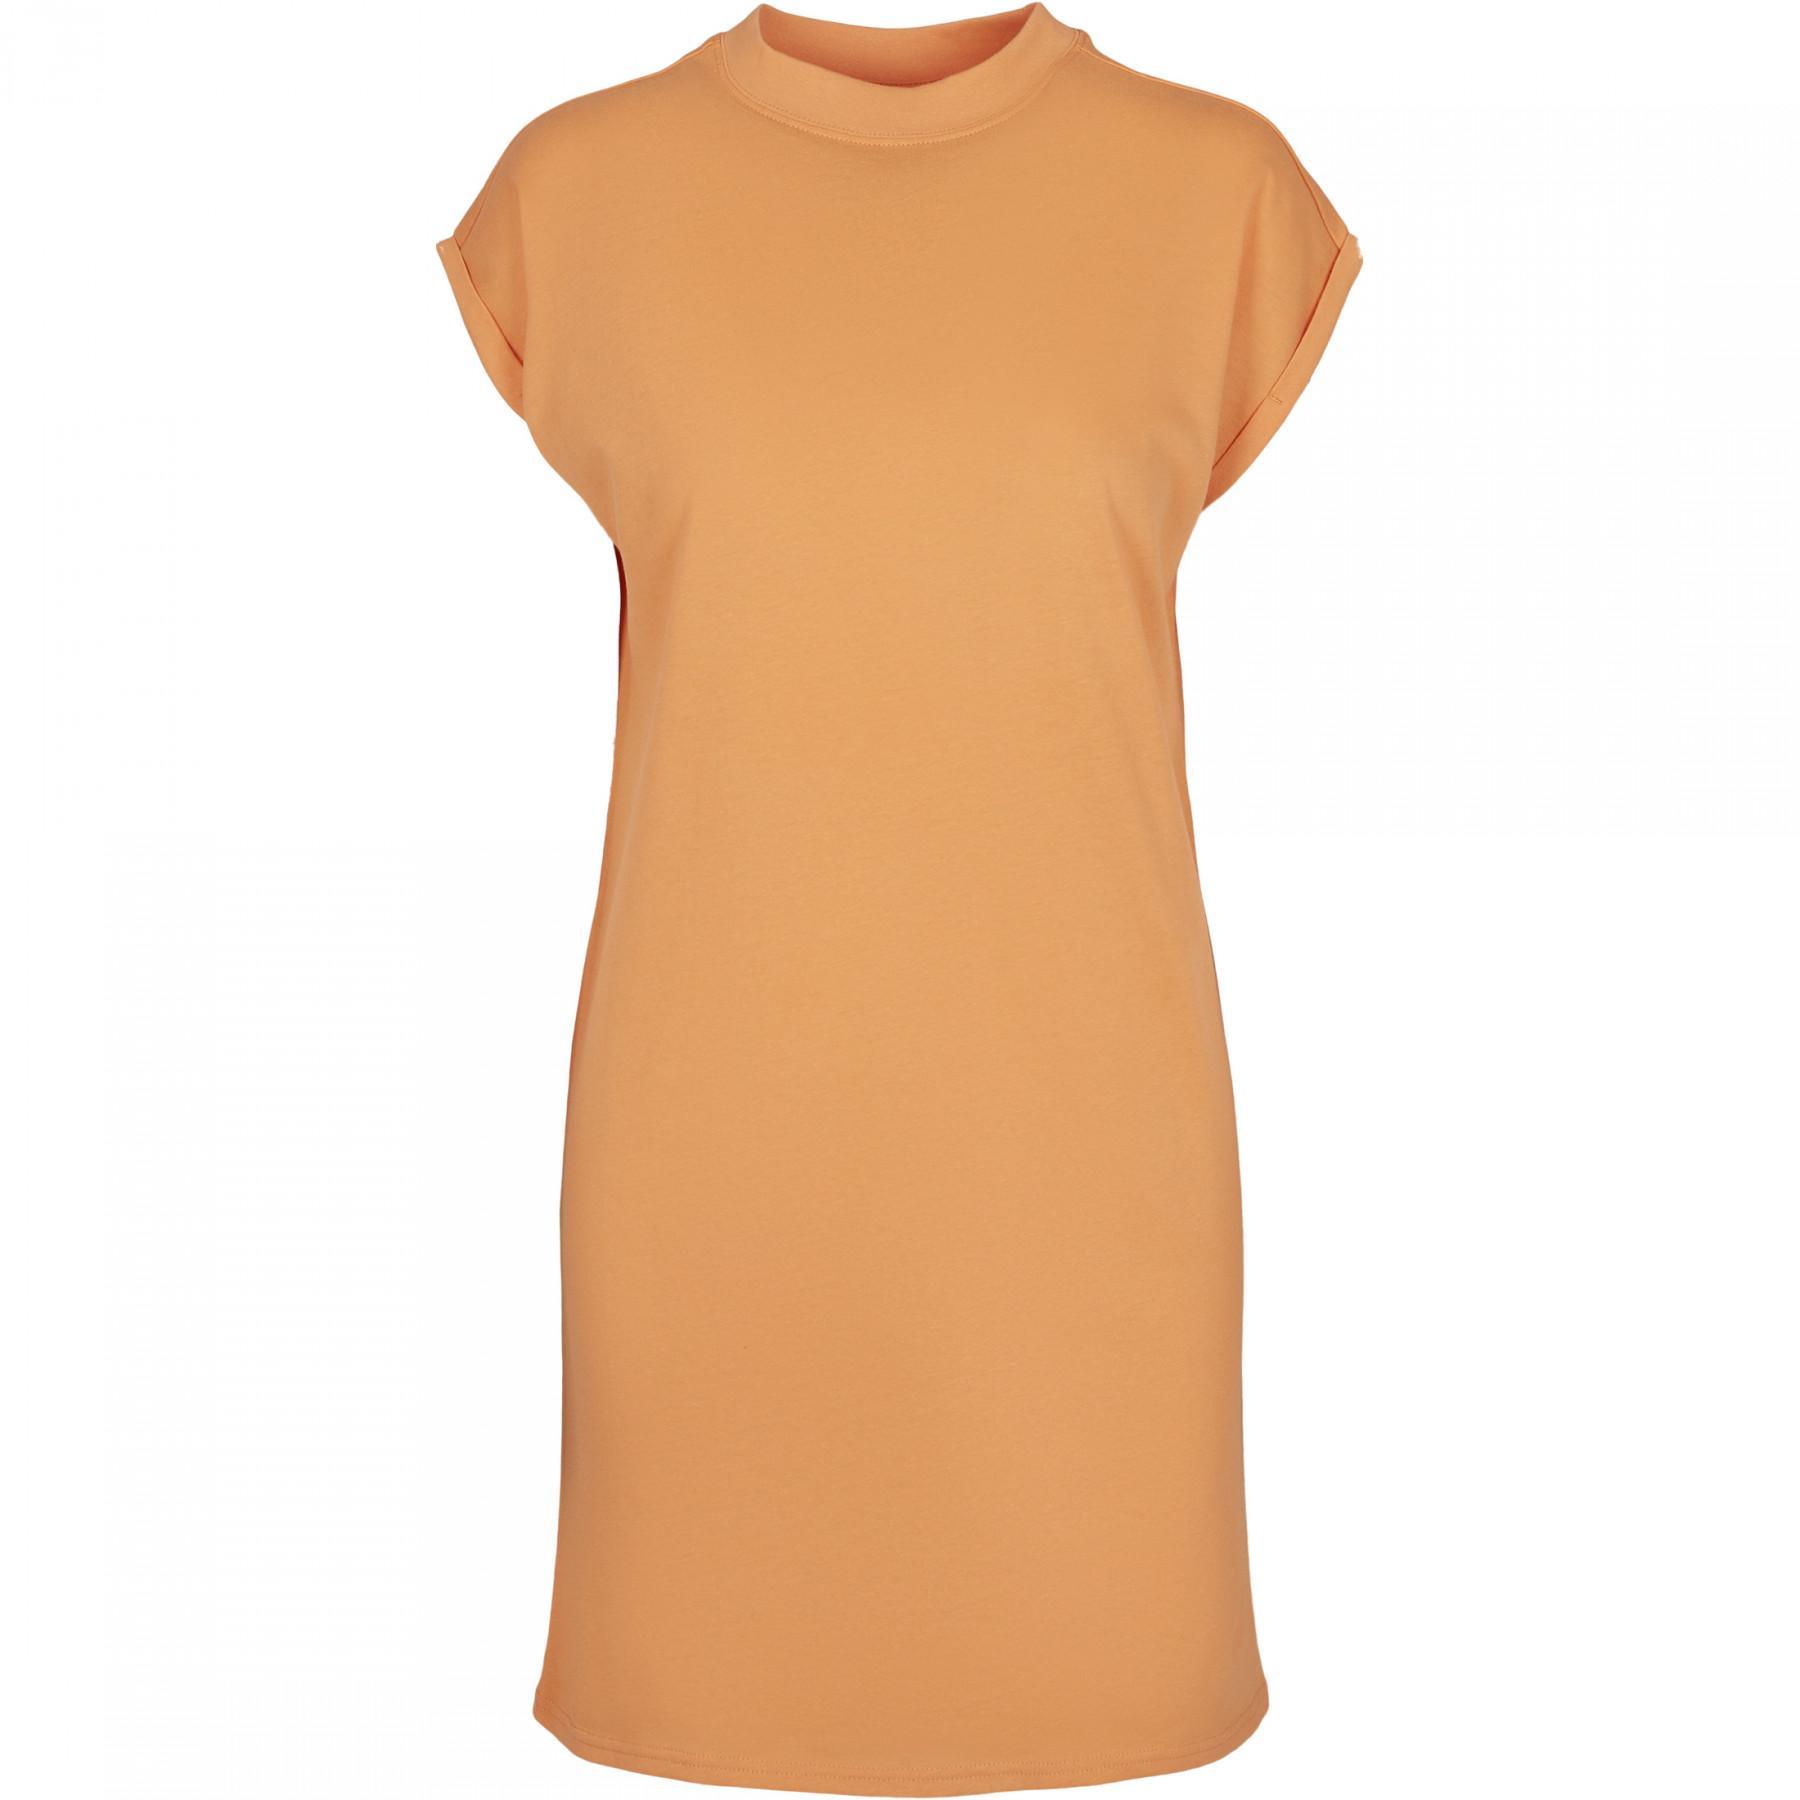 Women's Urban Classic turtle extended GT dress